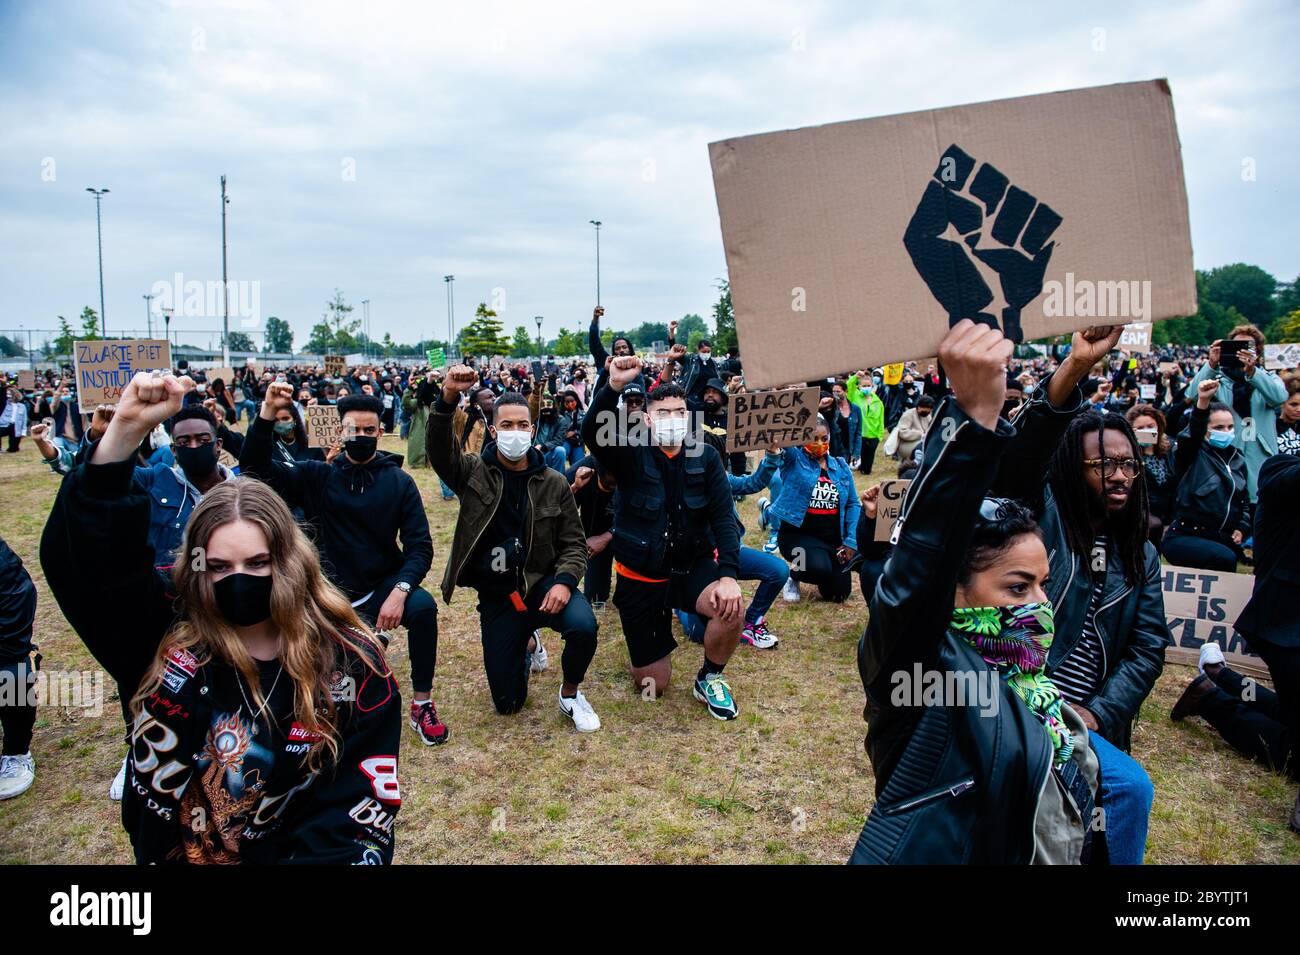 Protesters take a knee during the demonstration.Thousands of people gathered at the Nelson Mandela Park to protest against police brutality and racism which is an initiative of residents of the Bijlmer district, the largest population of Afro-Dutch people in Amsterdam. The black community has been a victim of oppression for decades since the 1990s. Stock Photo